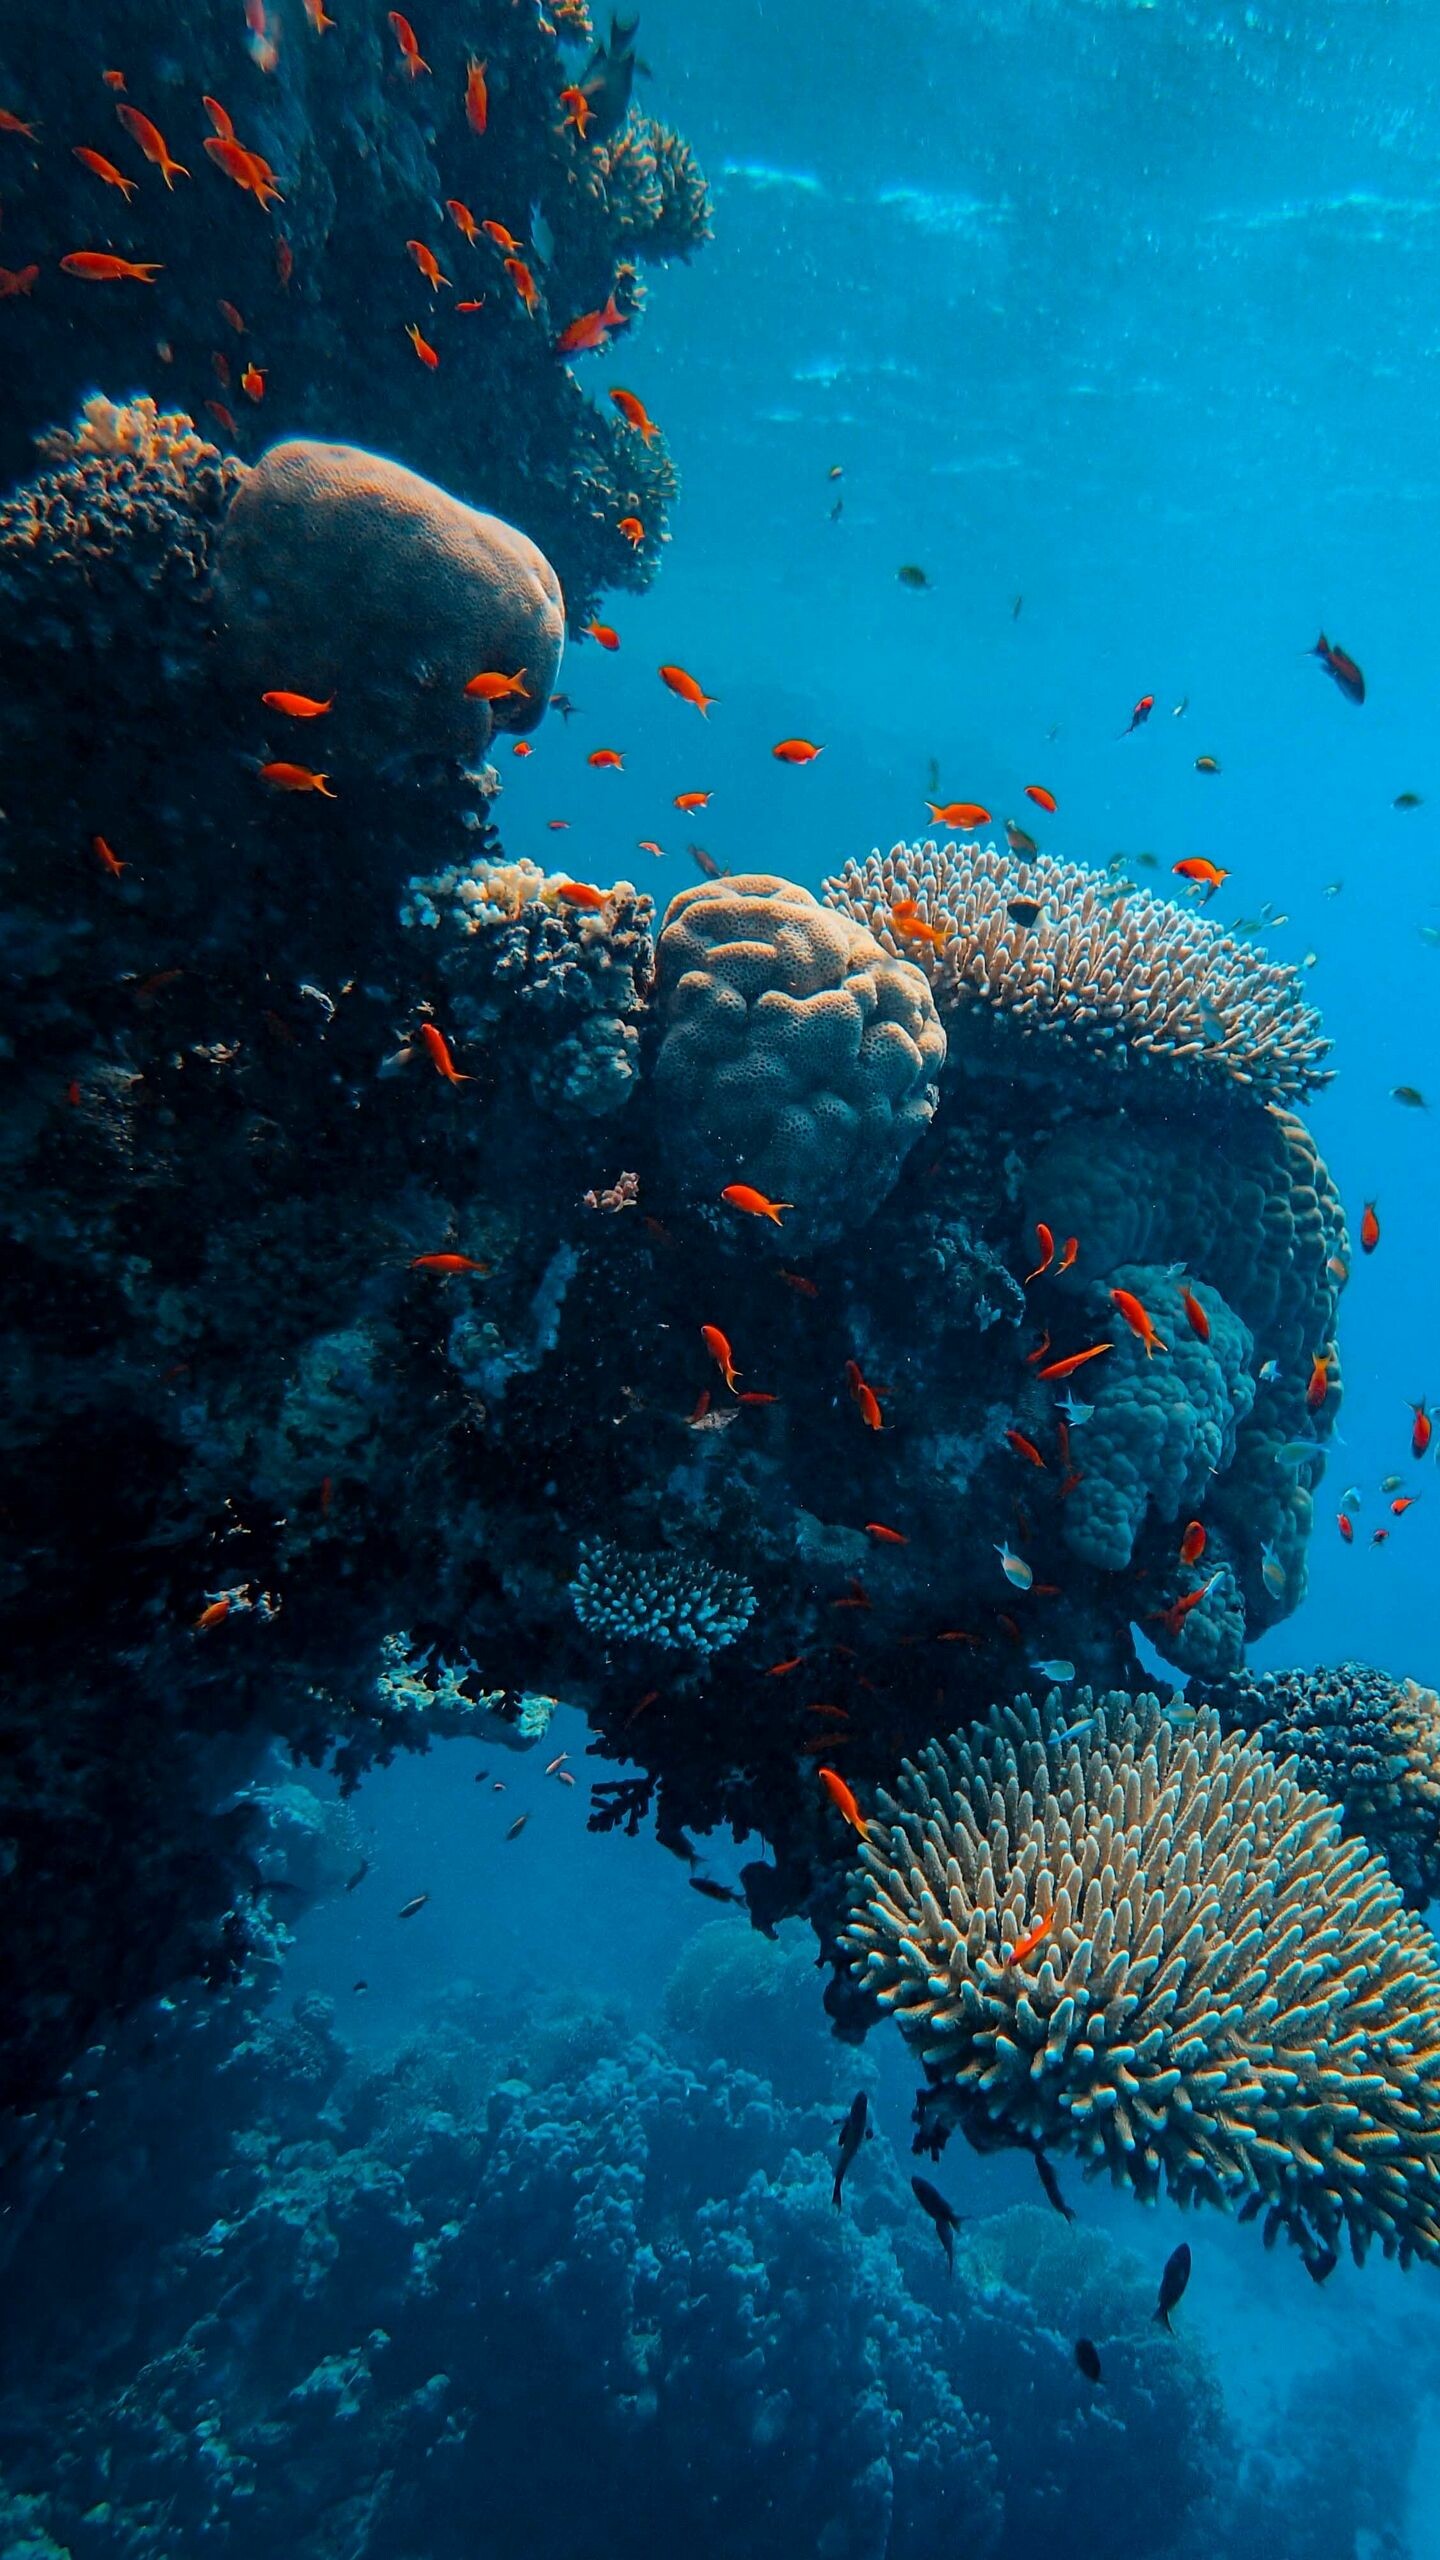 Great Barrier Reef: Underwater world, Fish and corals, Sea creatures. 1440x2560 HD Wallpaper.